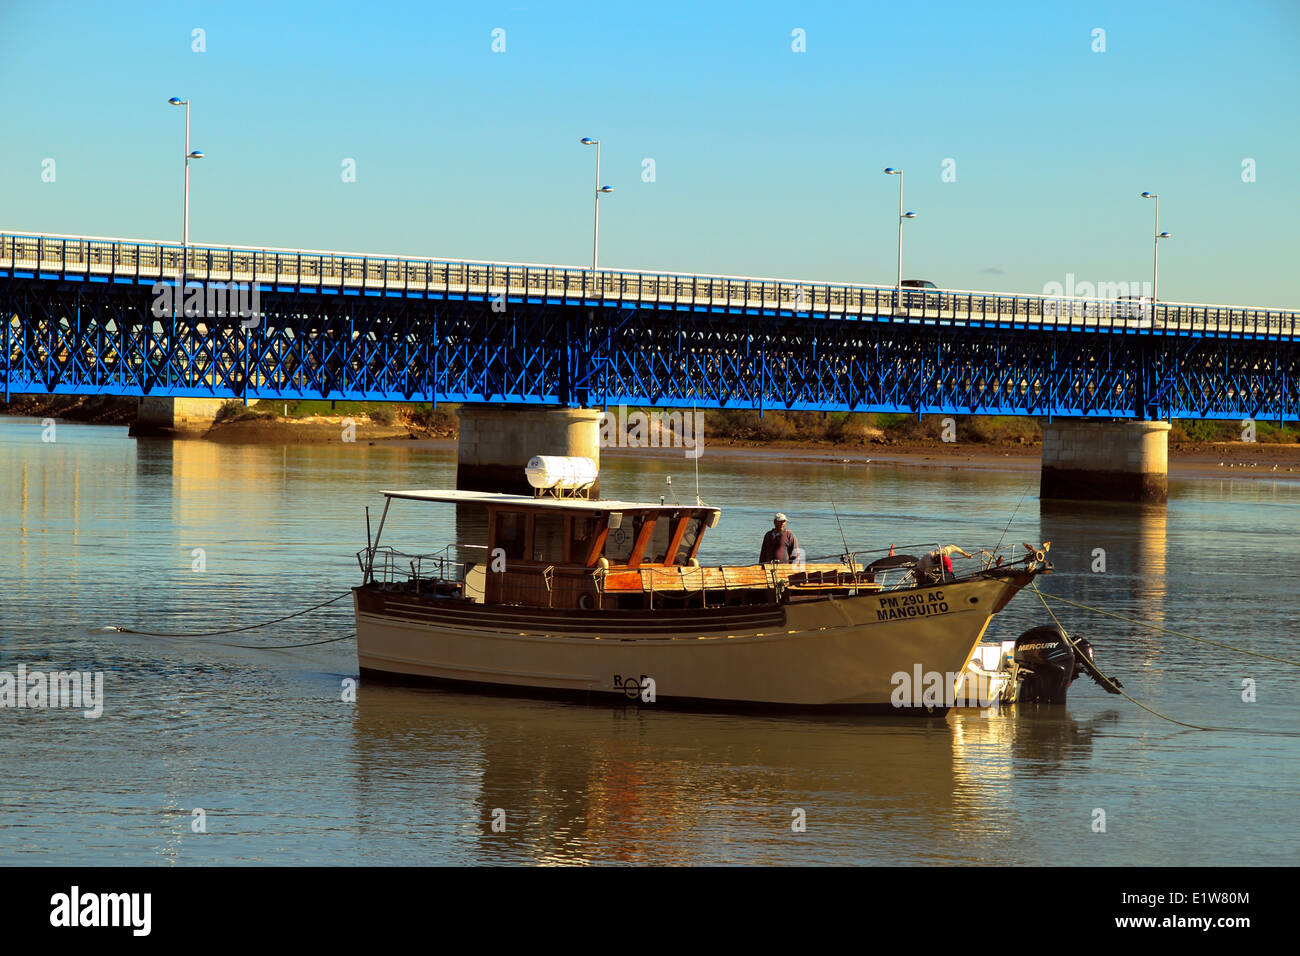 Road Bridge over the River Arade, with a boat in the foreground, Portimao Harbour, Algarve, Portugal Stock Photo